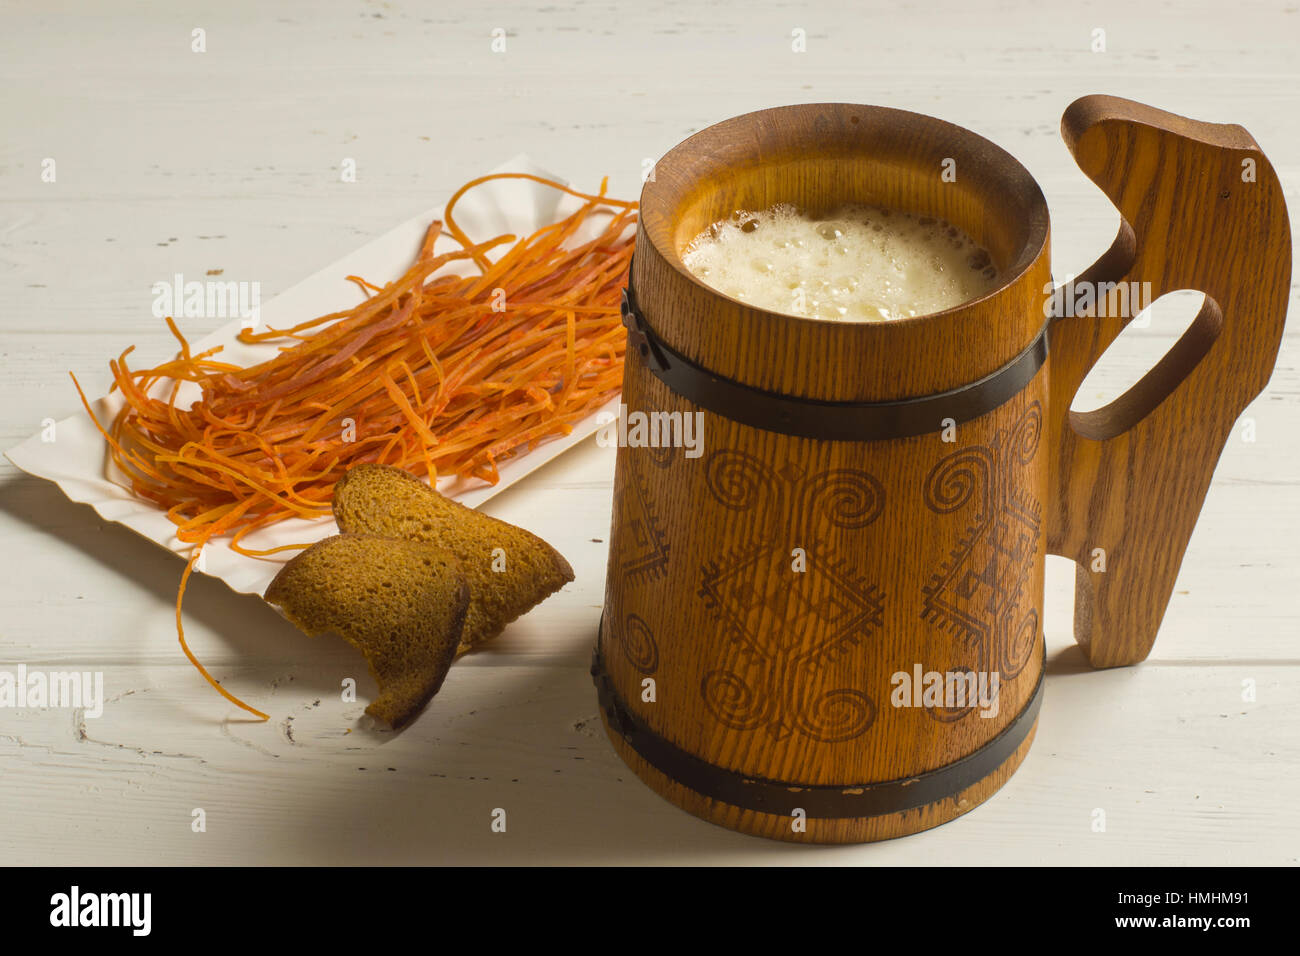 Mug of Beer, Dried Bread, and Dried Seafood on White Wooden Background Stock Photo